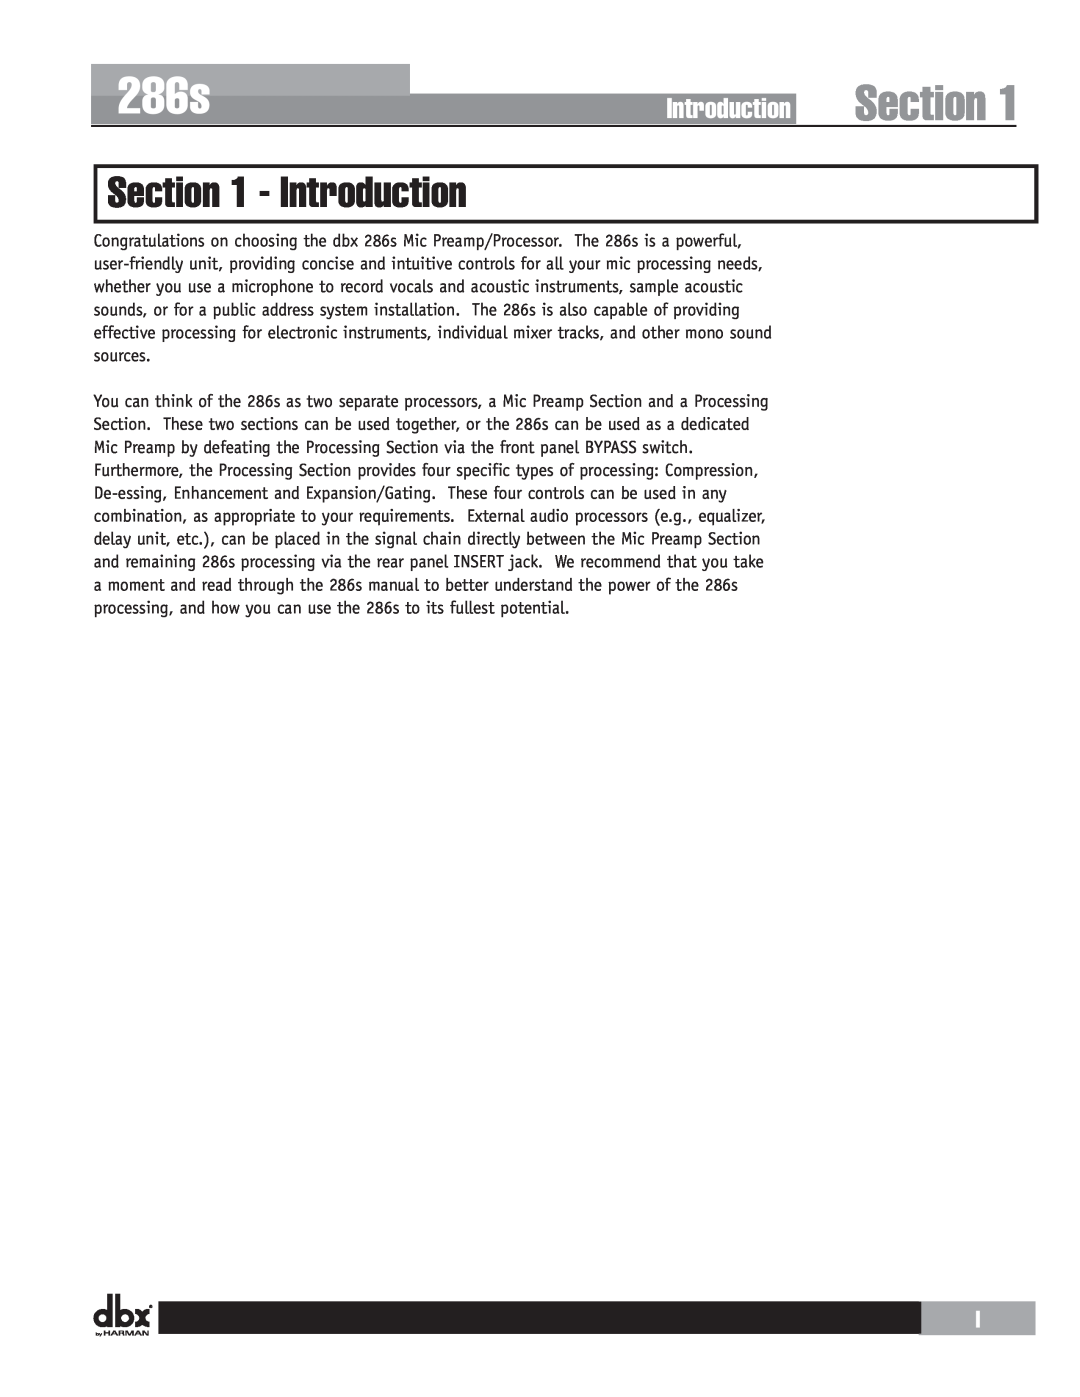 Harman user manual Introduction, Section, 286s 